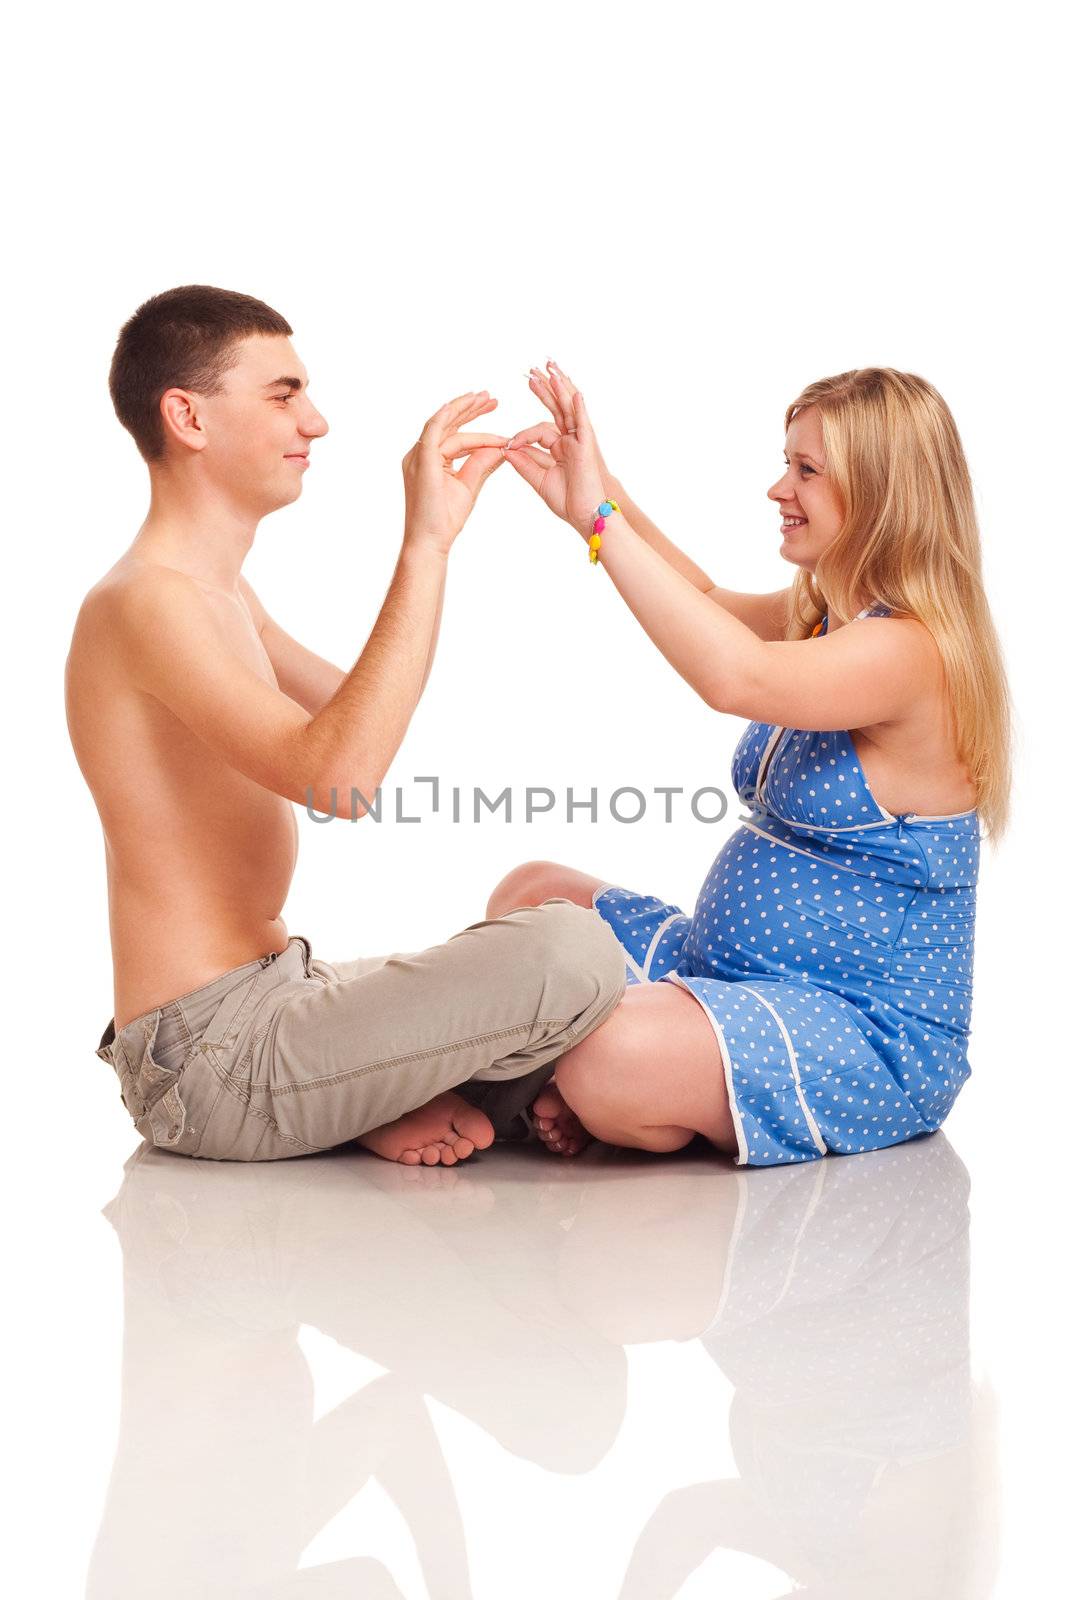 Pregnant woman with her husband kissing by hands. Studio shoot on white.